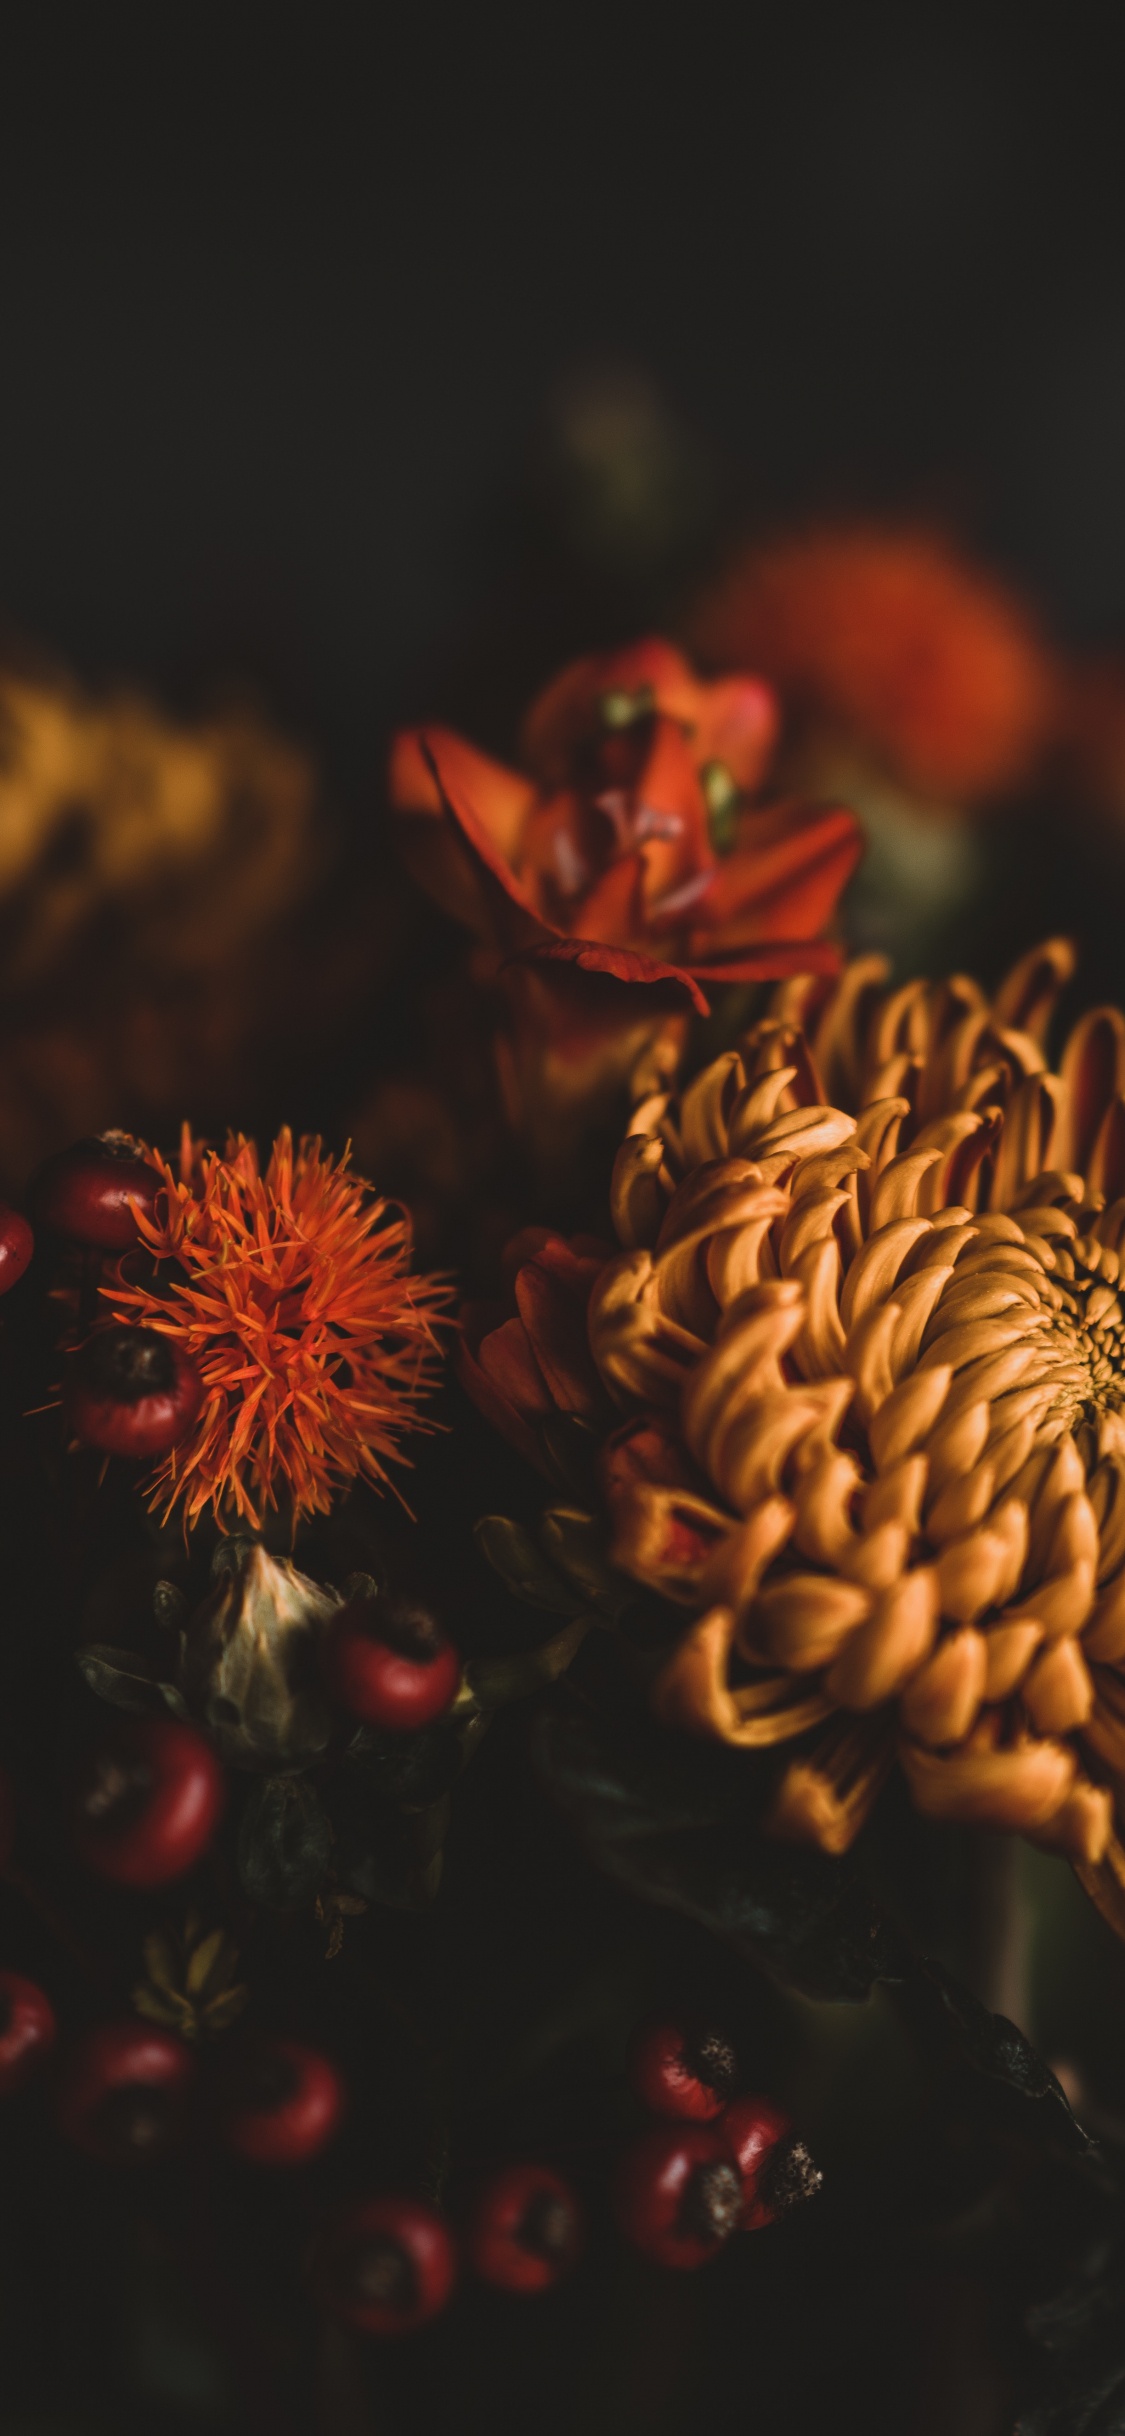 Brown and Red Flower in Close up Photography. Wallpaper in 1125x2436 Resolution